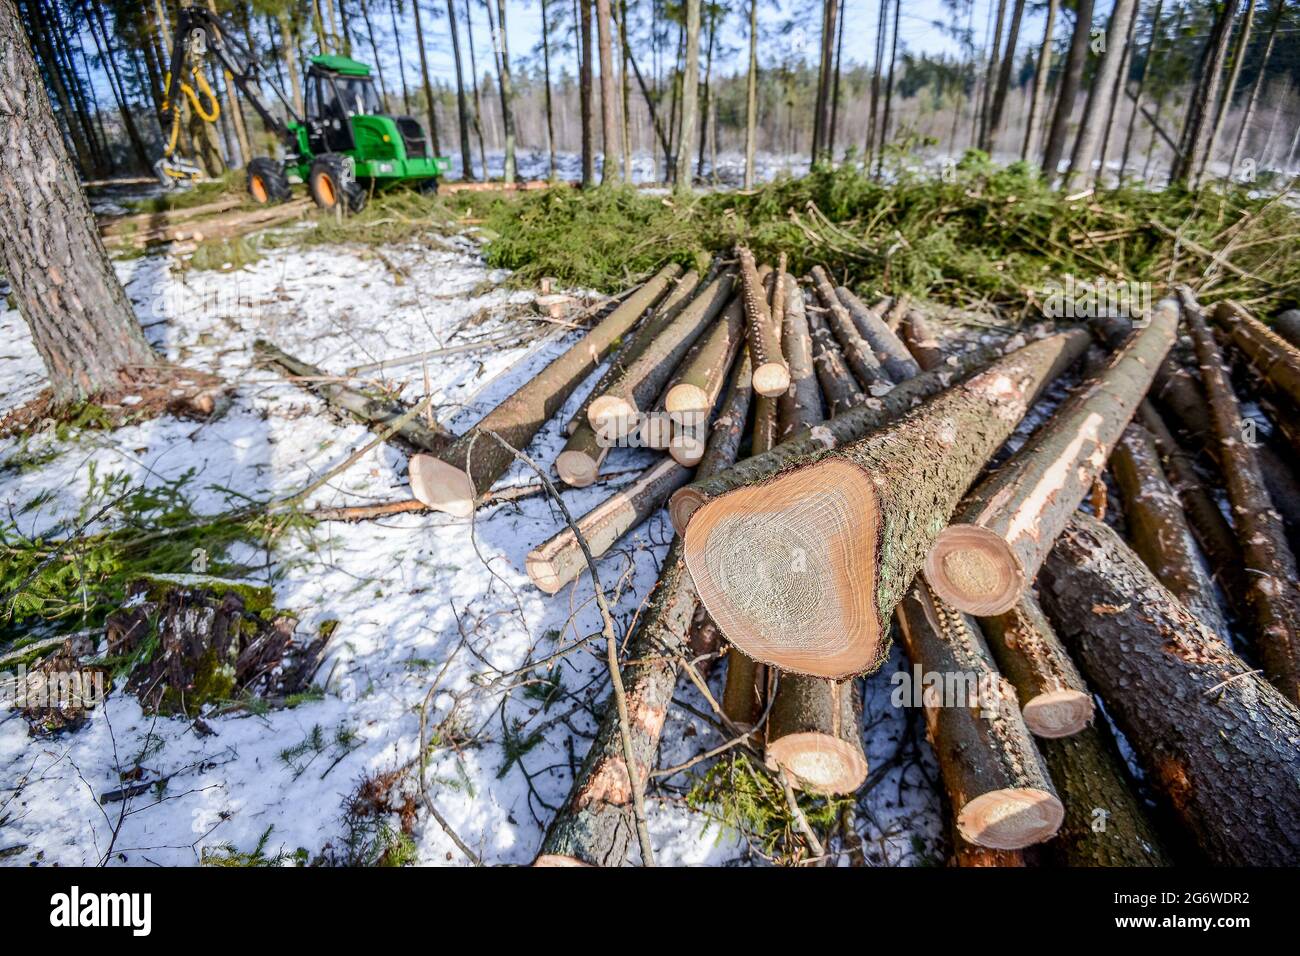 Belarus - 02.02.2015 - Machines for logging, timber production, men's work are working in the forest. Harvester in the woods. Harvesting of wood. Firewood as a renewable energy source. Agriculture and forestry theme. Stock Photo